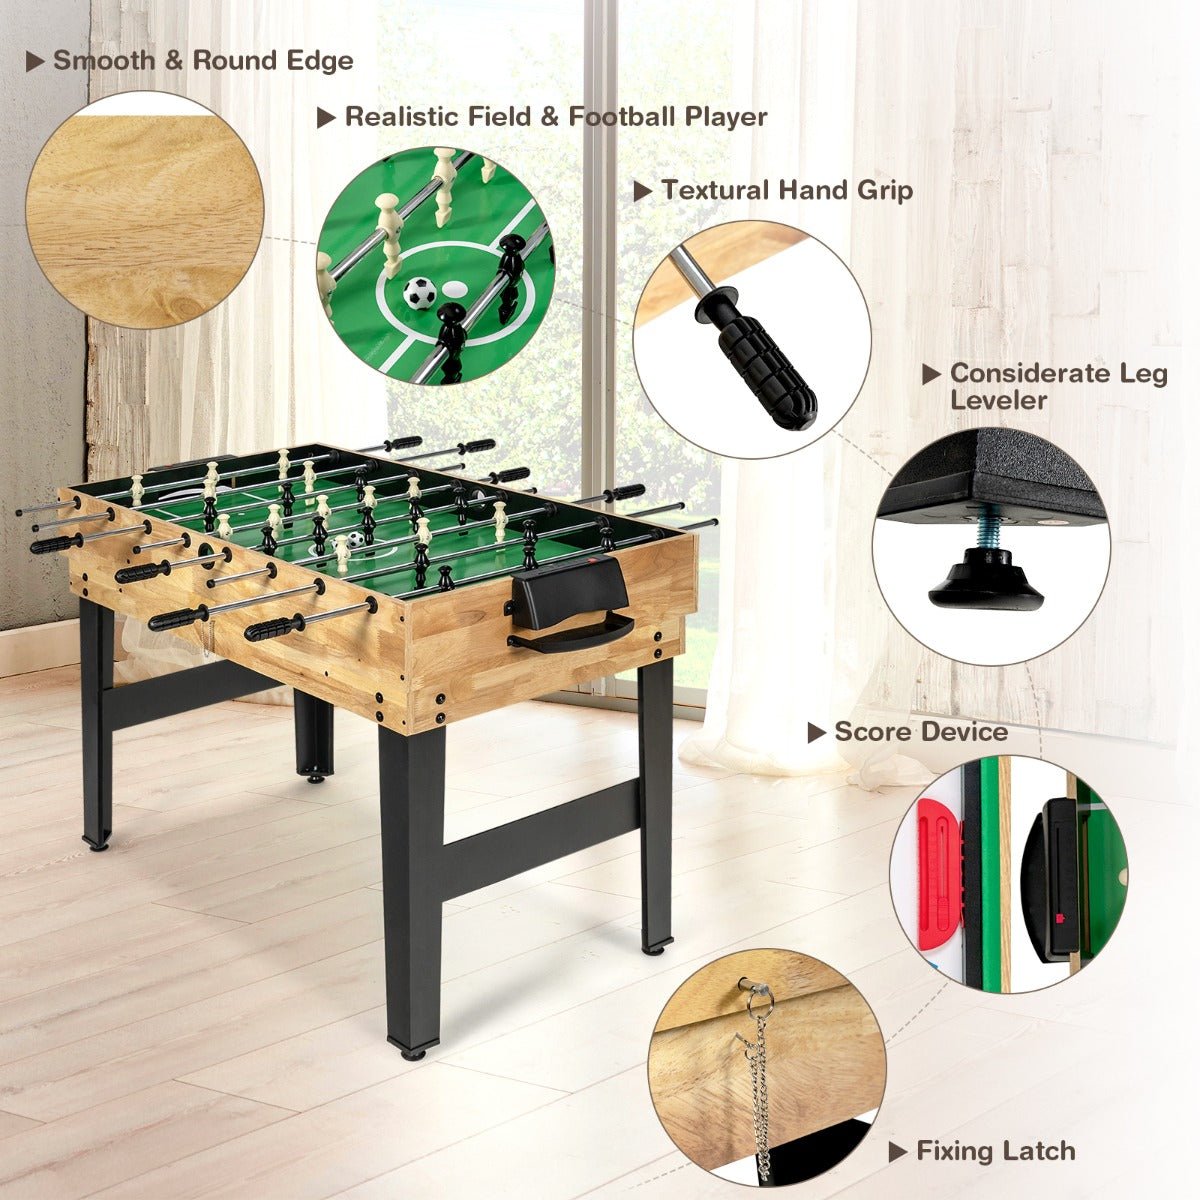 105.5 cm Multi Game Table for Game Room, Office, Bar, Club, Parties - Kids Mega Mart